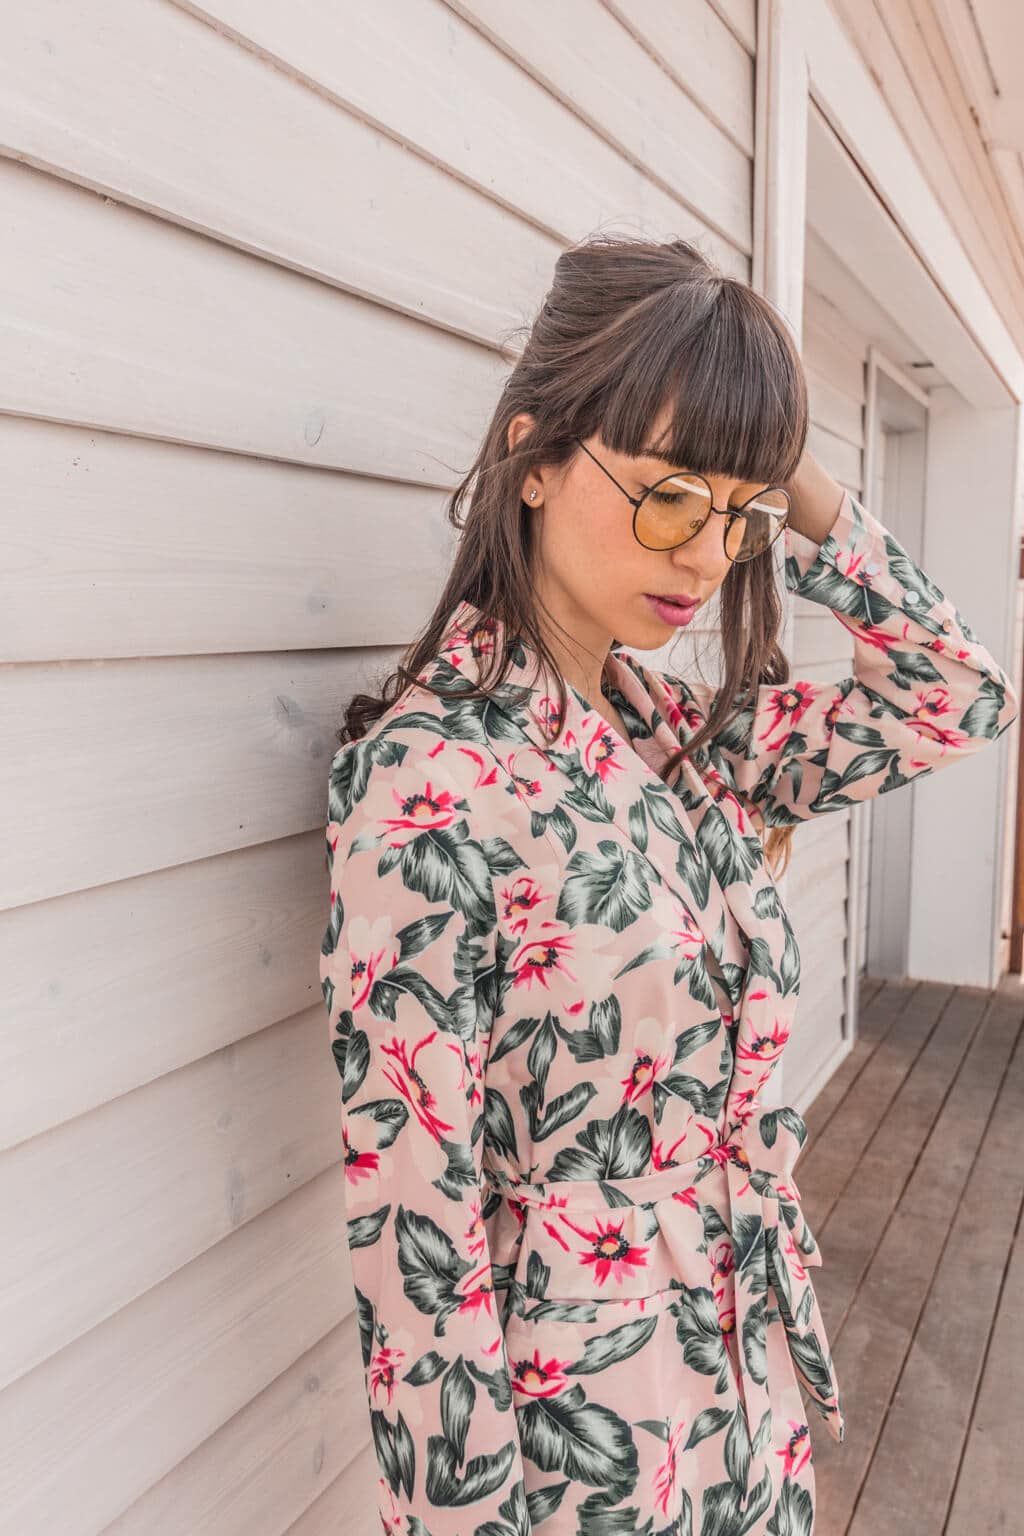 Spring is in the Air : 3 Outfits for the Most Amazing Season of the Year